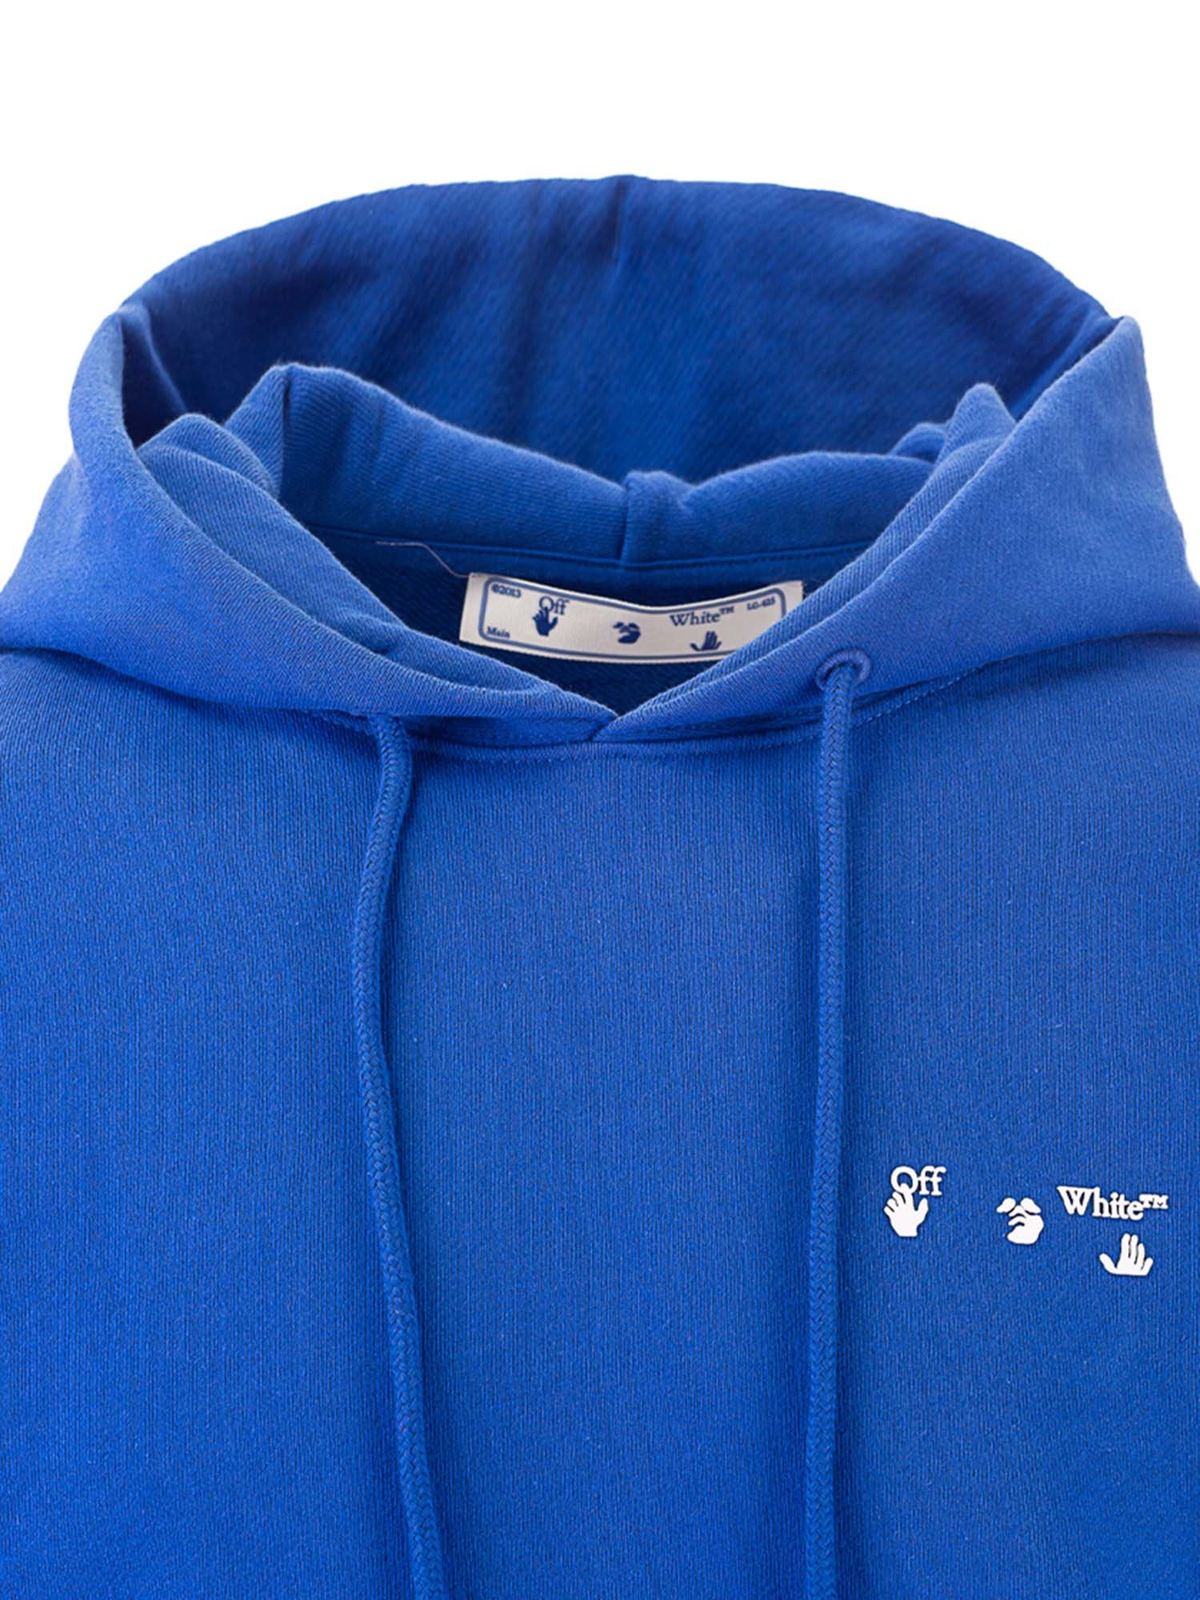 kalv trojansk hest lugt Sweatshirts & Sweaters Off-White - Diag Logo hoodie in blue -  OMBB034S21FLE0024501